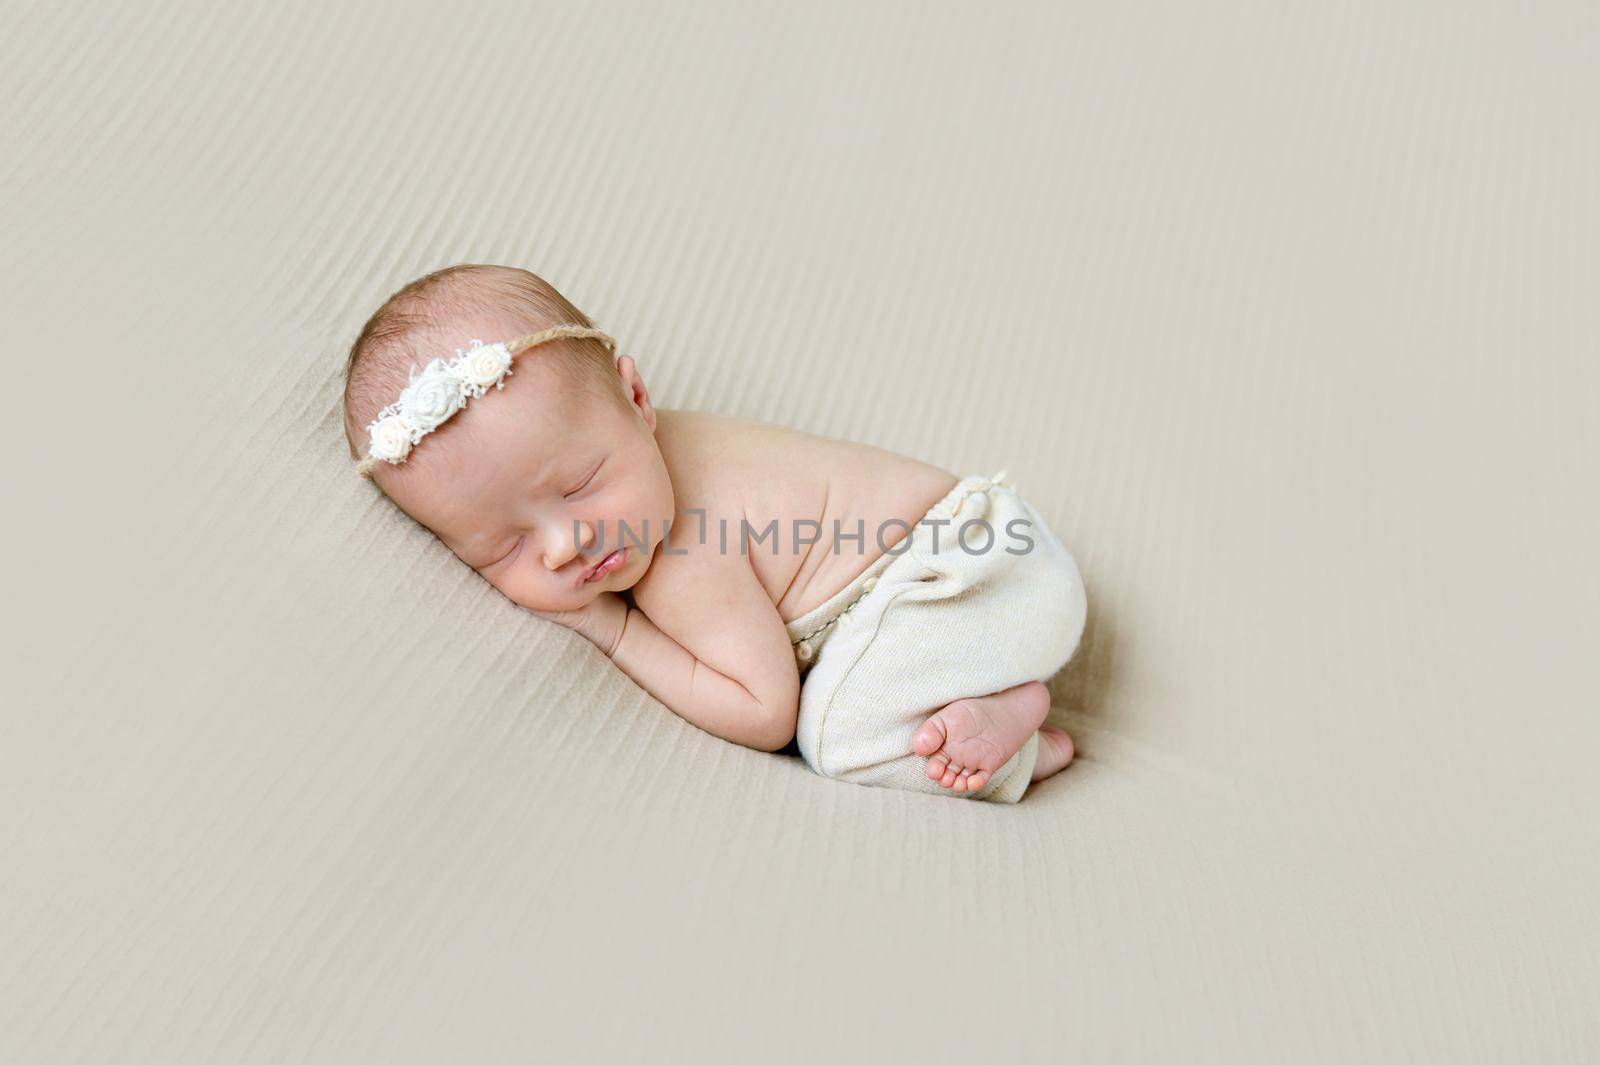 Aodrable newborn girl in hairband with flowers, sleeping on her side, funny pose